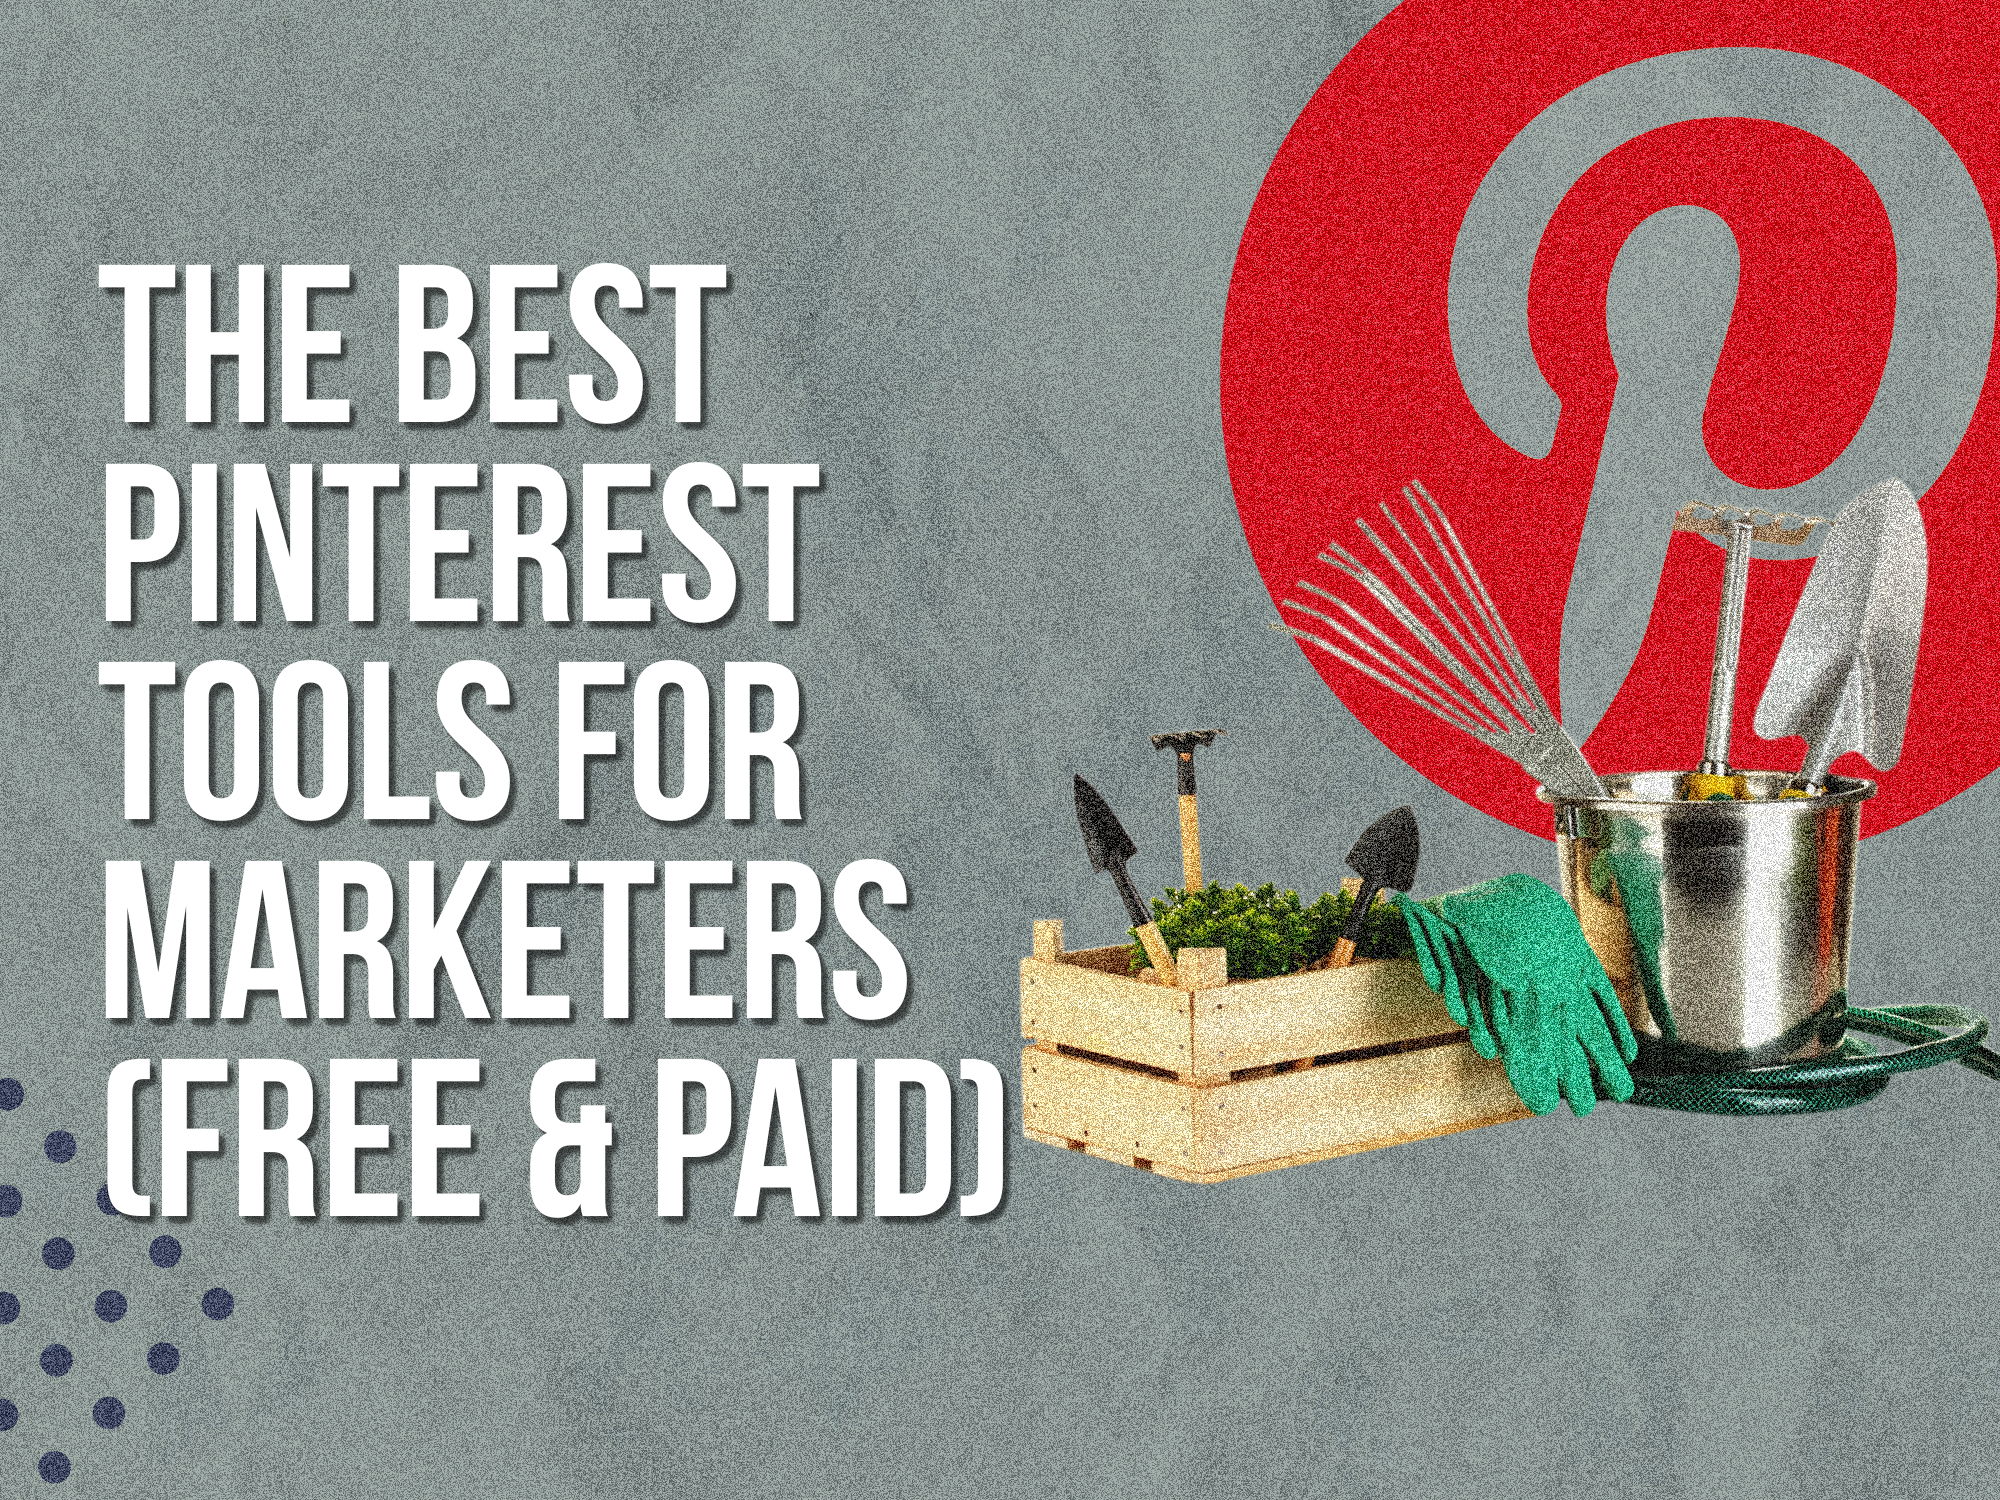 25 Best Pinterest Tools For Marketers (Free & Paid)